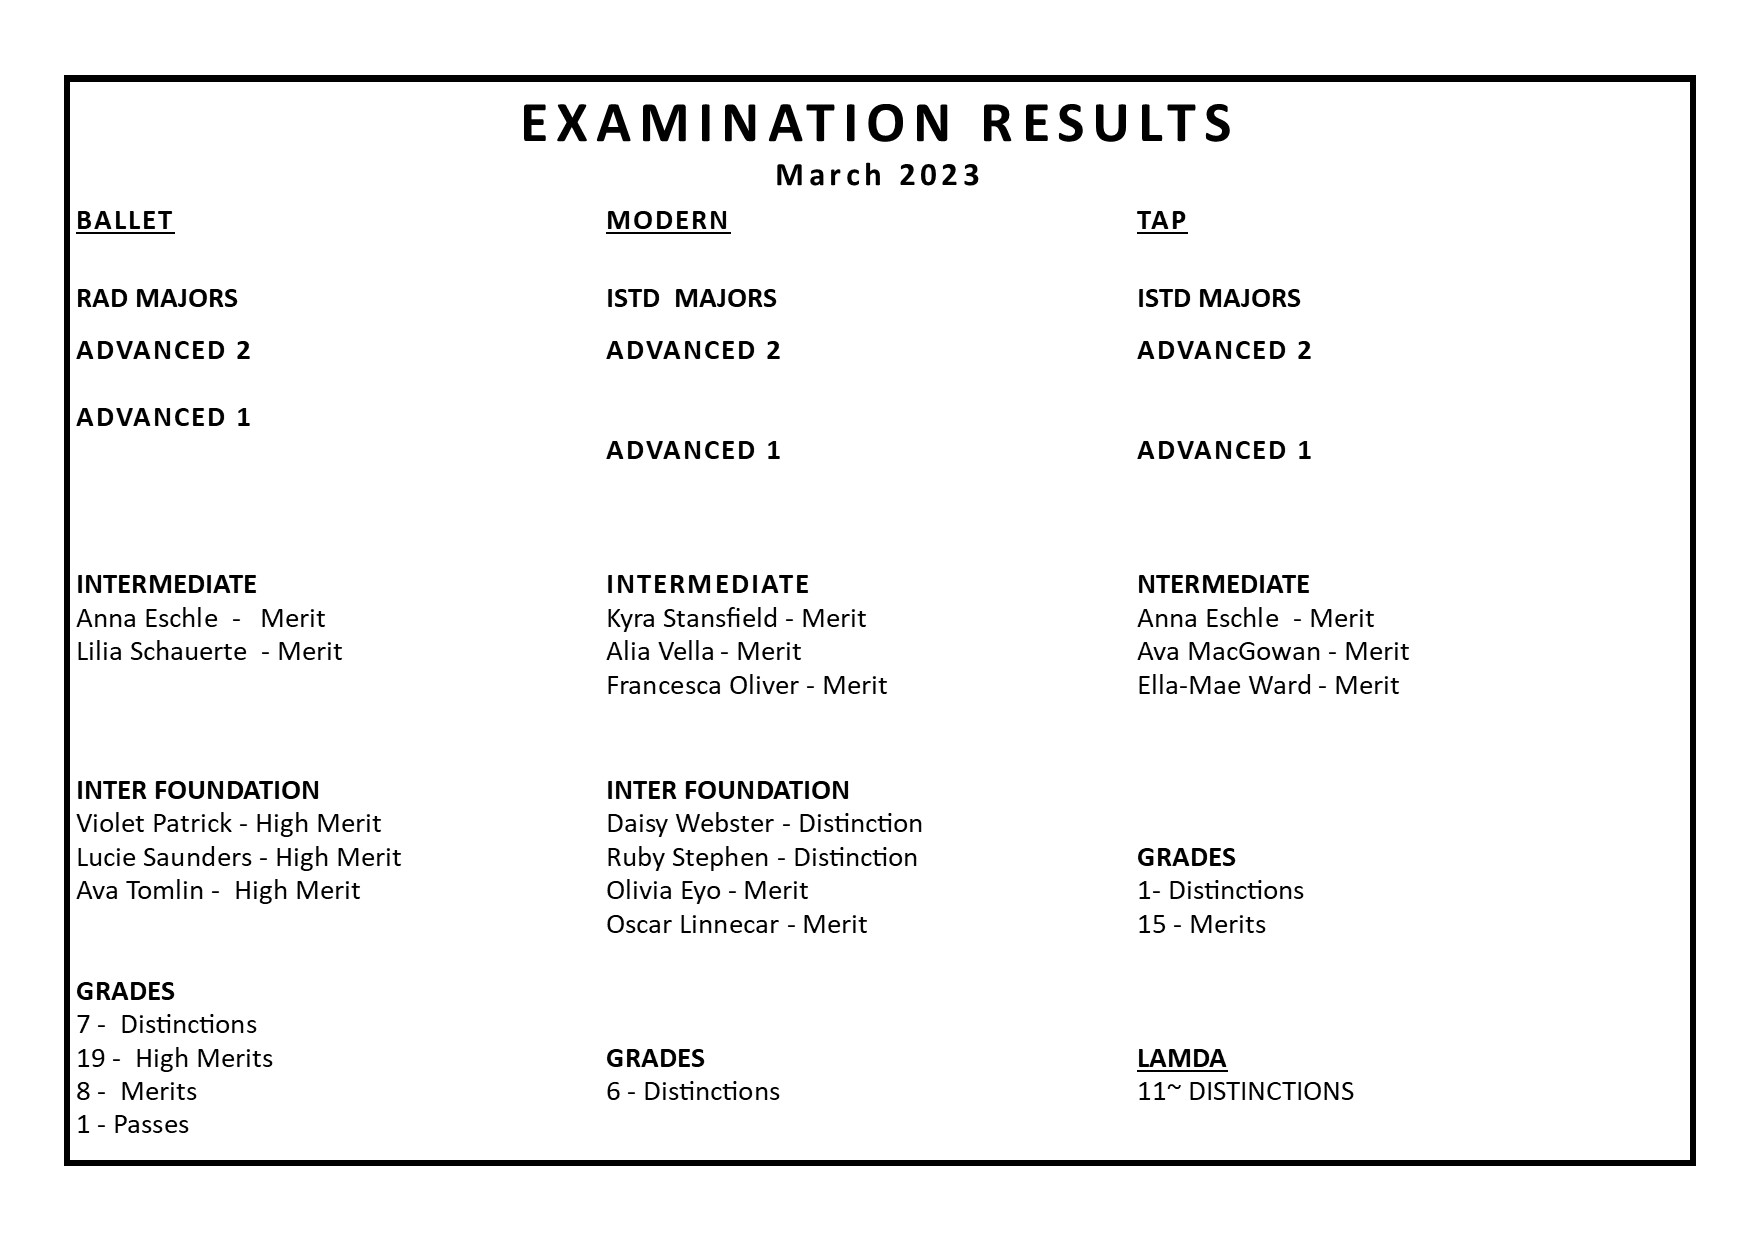 EXAM RESULTS March 2023